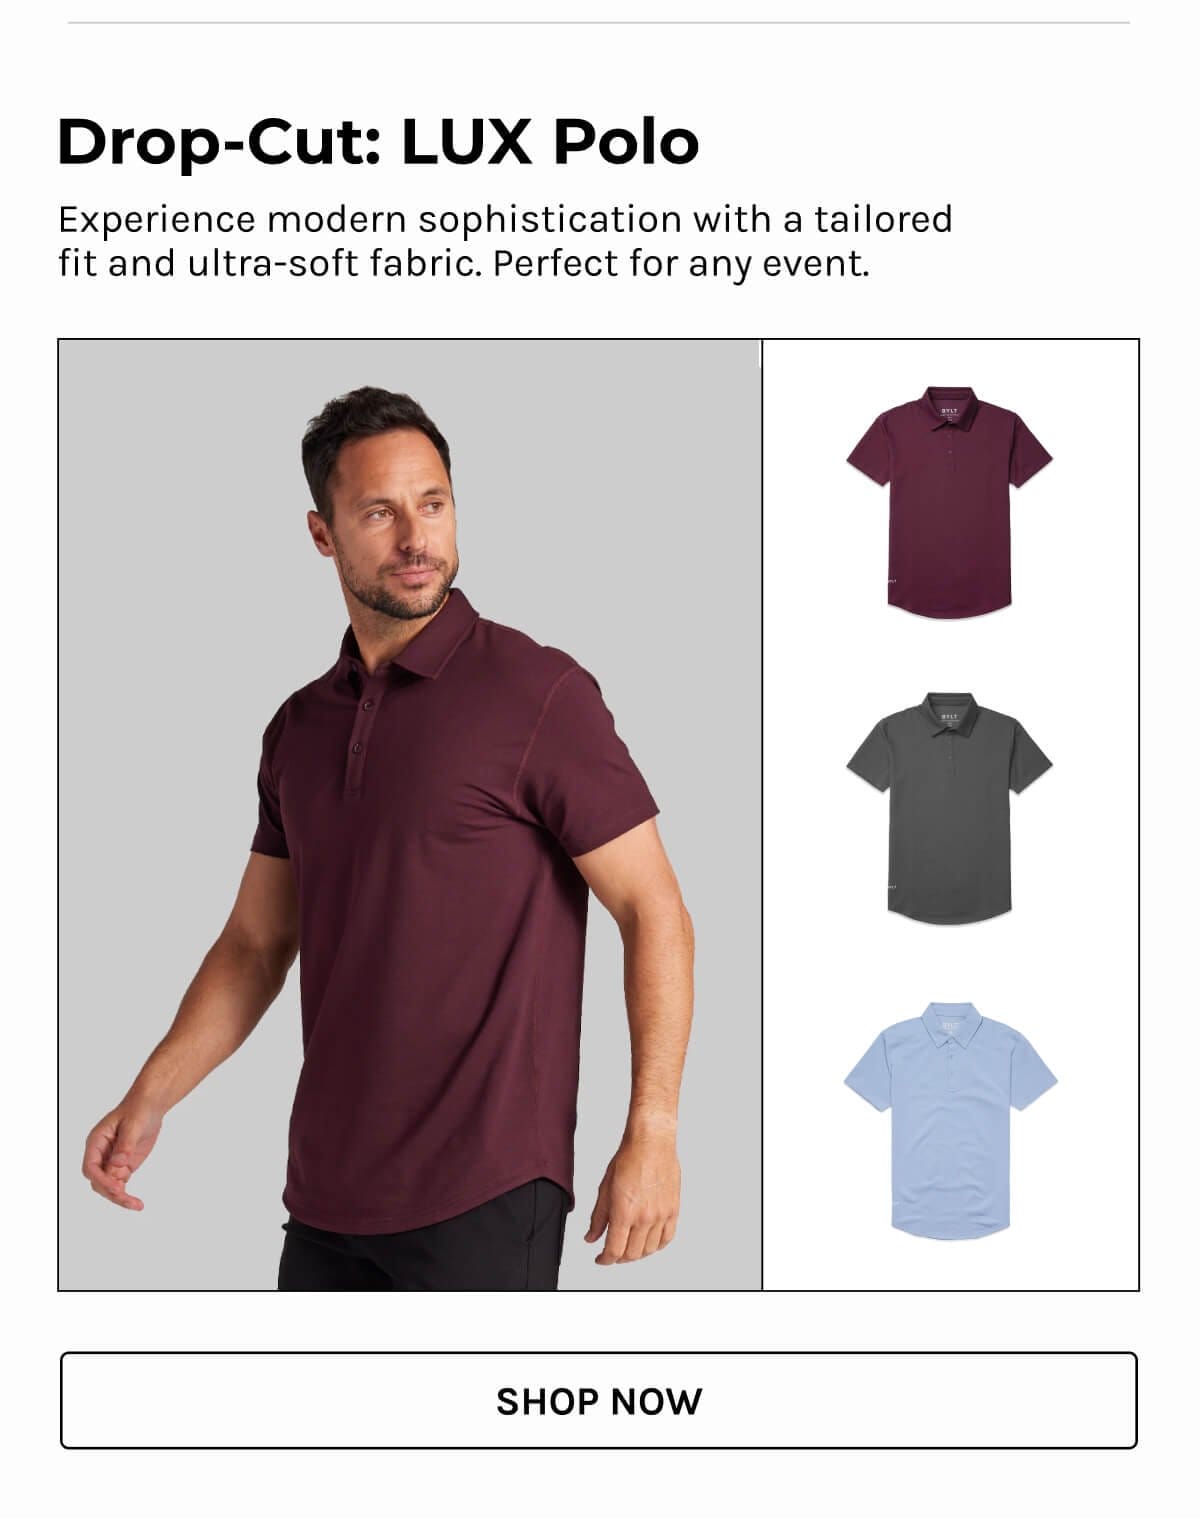 Drop-Cut: LUX Polo - Experience modern sophistication with a tailored fit and ultra-soft fabric